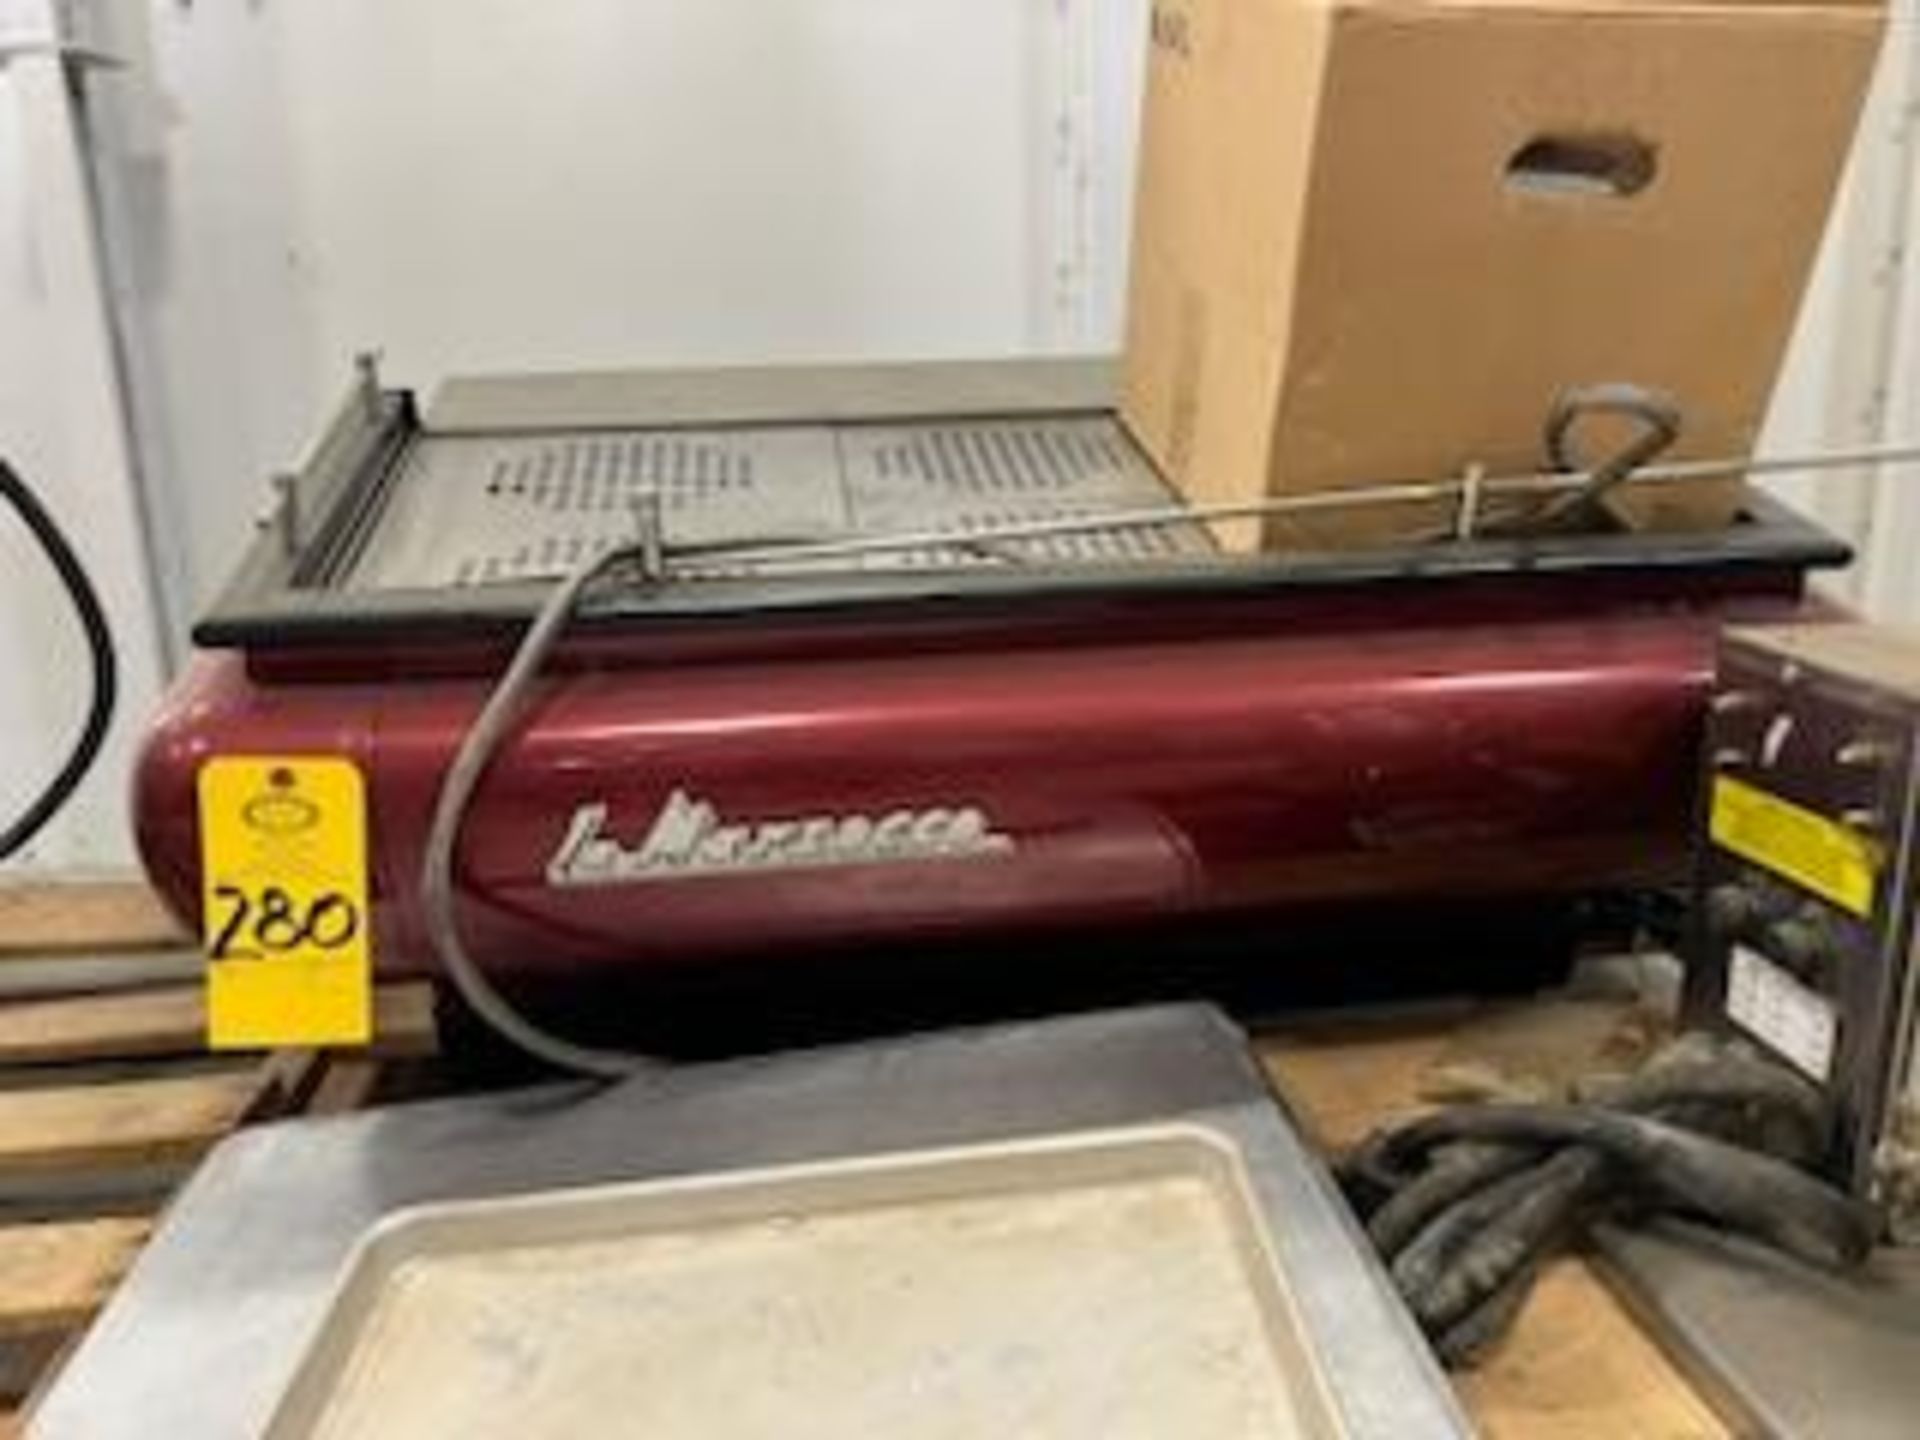 LA Marzocco Mdl. 3FB-EE Cappuccino Maker, Ser. #Z3458, 208/240 volts, 1 phase (Required Loading Fee: